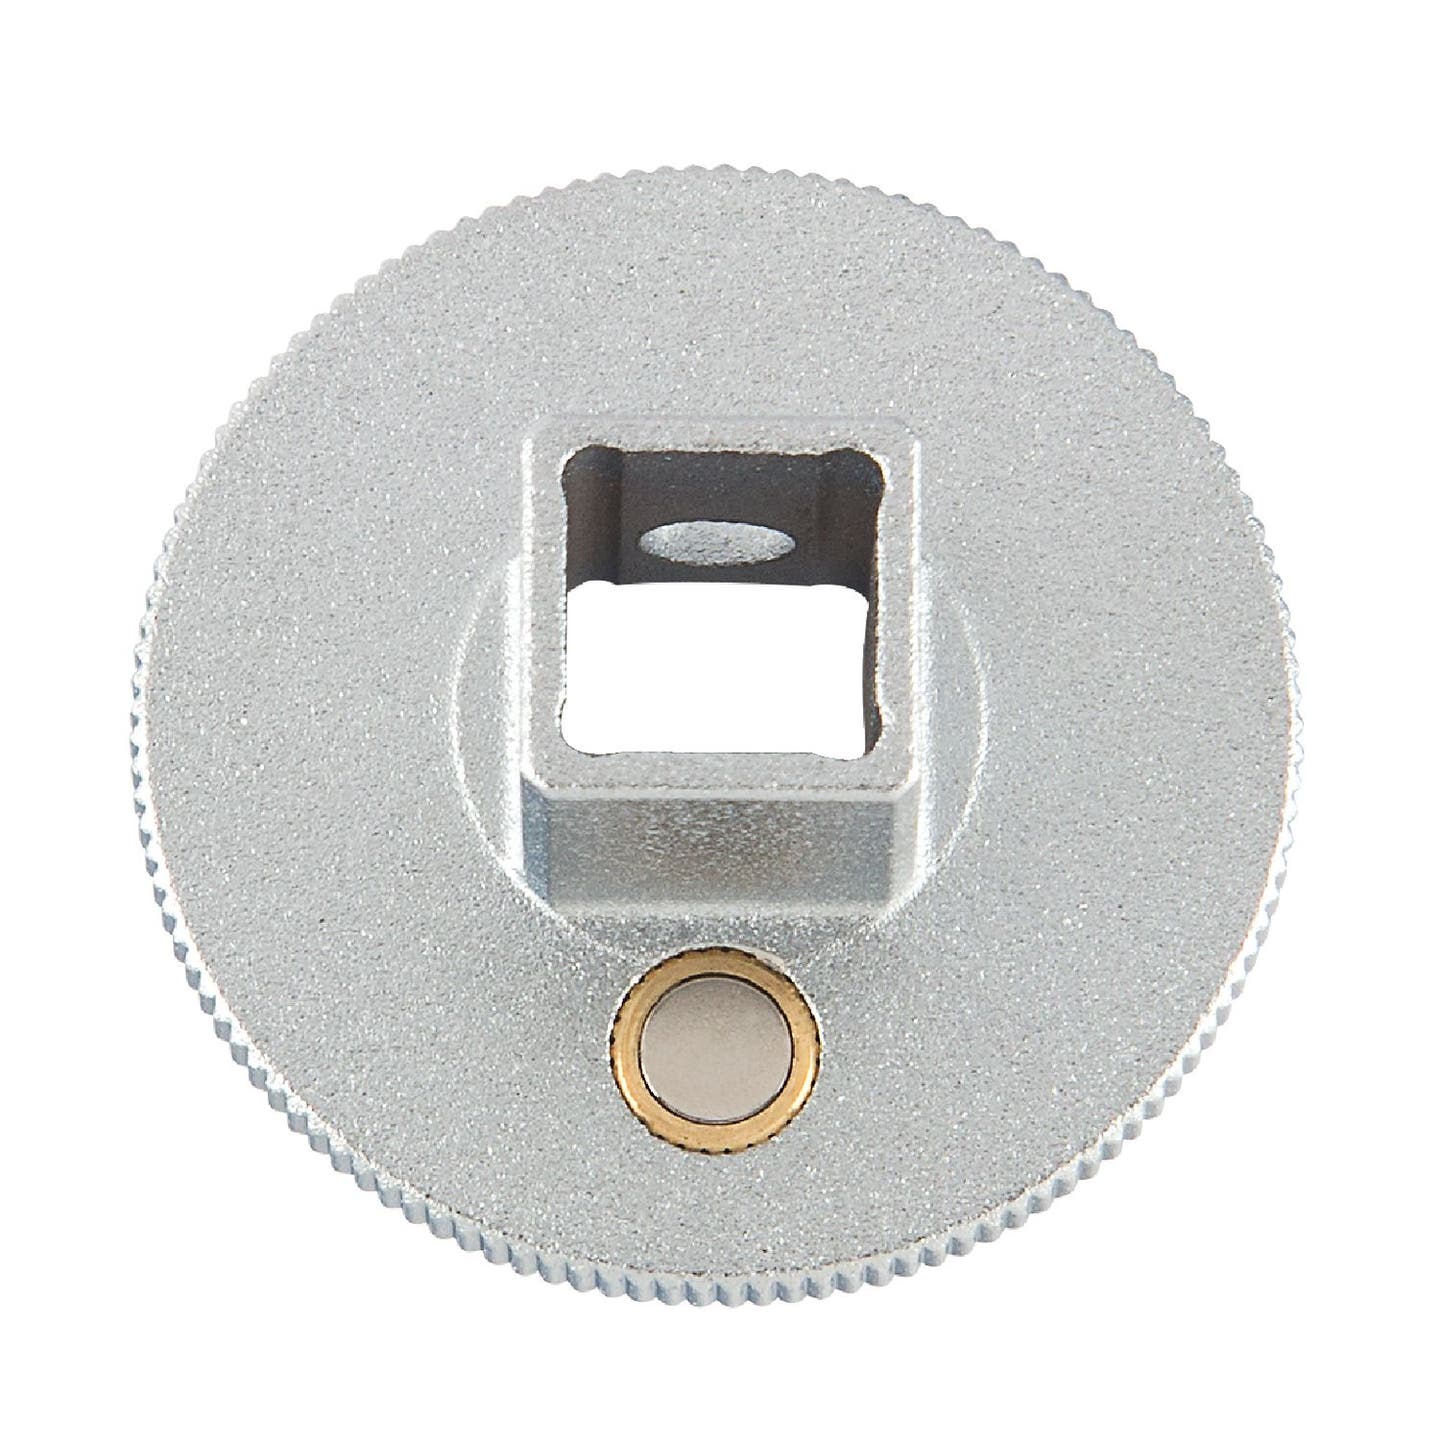 3/8" DRIVE FEMALE FOR 1/2" MALE REDUCING MAGNETIC ADAPTER